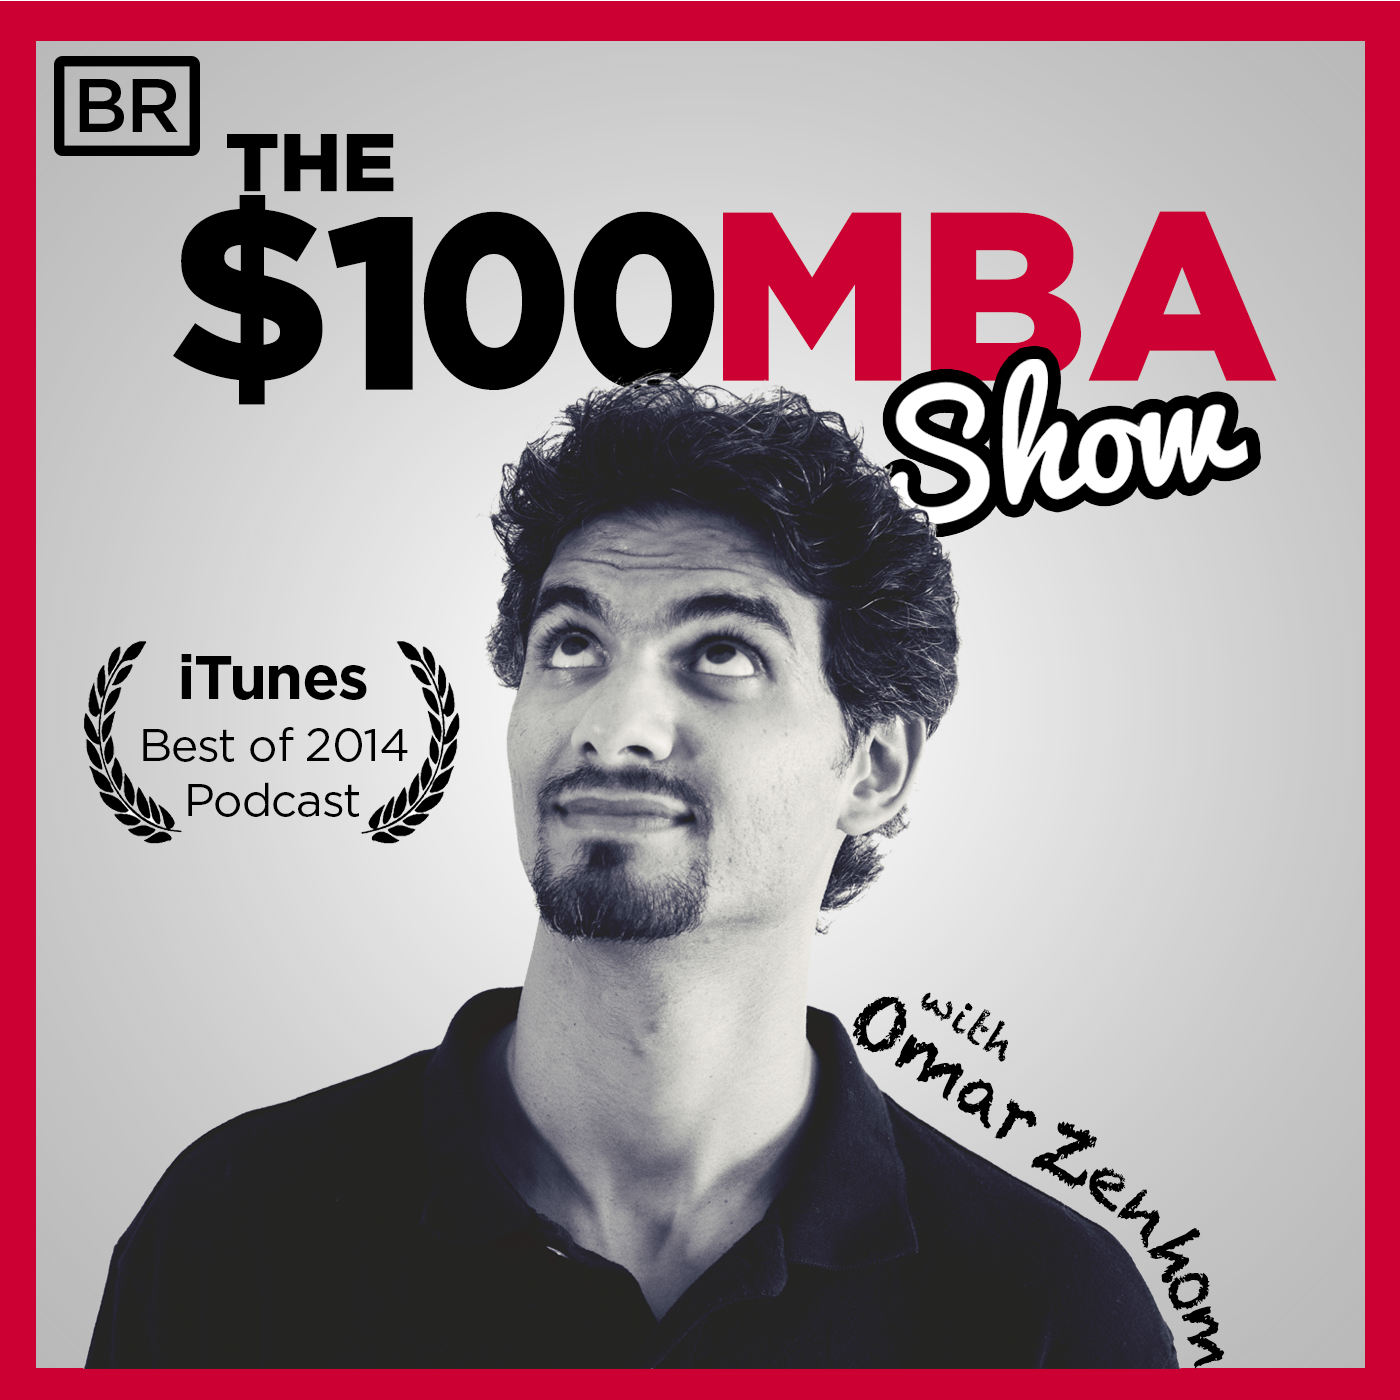 the $100 MBA Show Podcast